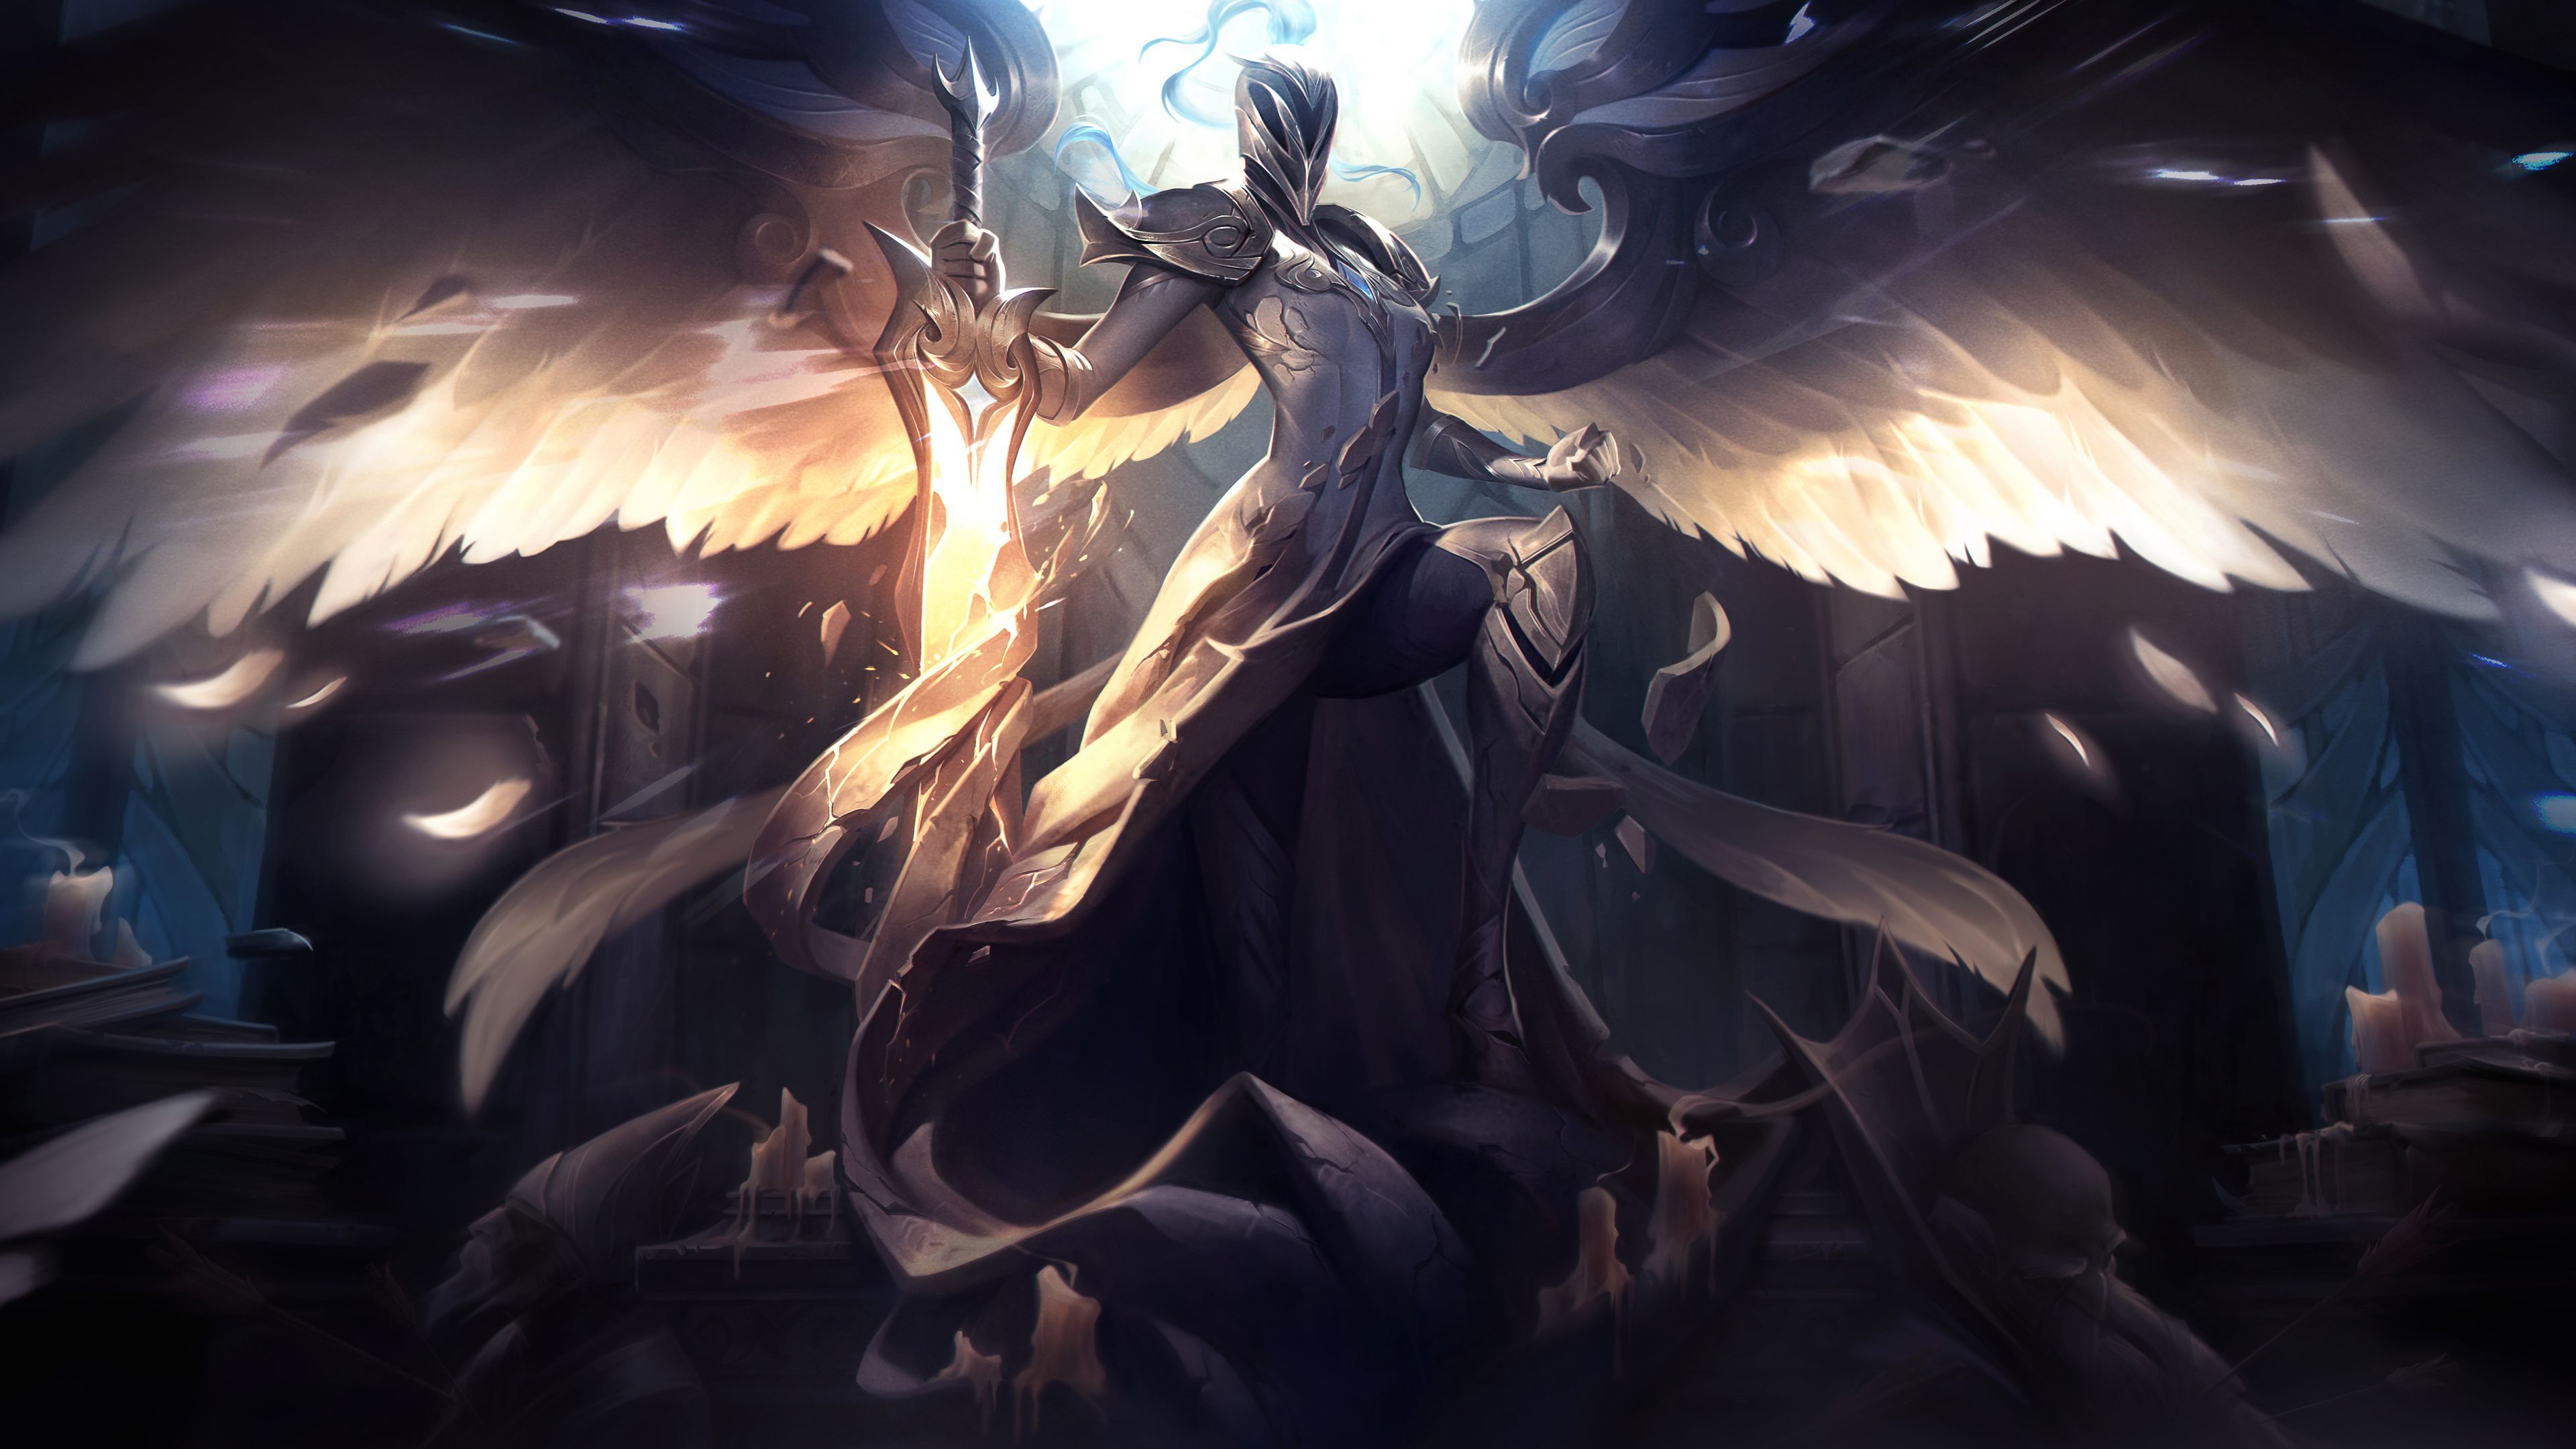 Aether Wing Kayle League Of Legends 4k League Of Legends Wallpaper, Hd Wallpaper, Games Wallpaper, 5k Wallpaper, 4k Wallpap. League Of Legends, Legend, League